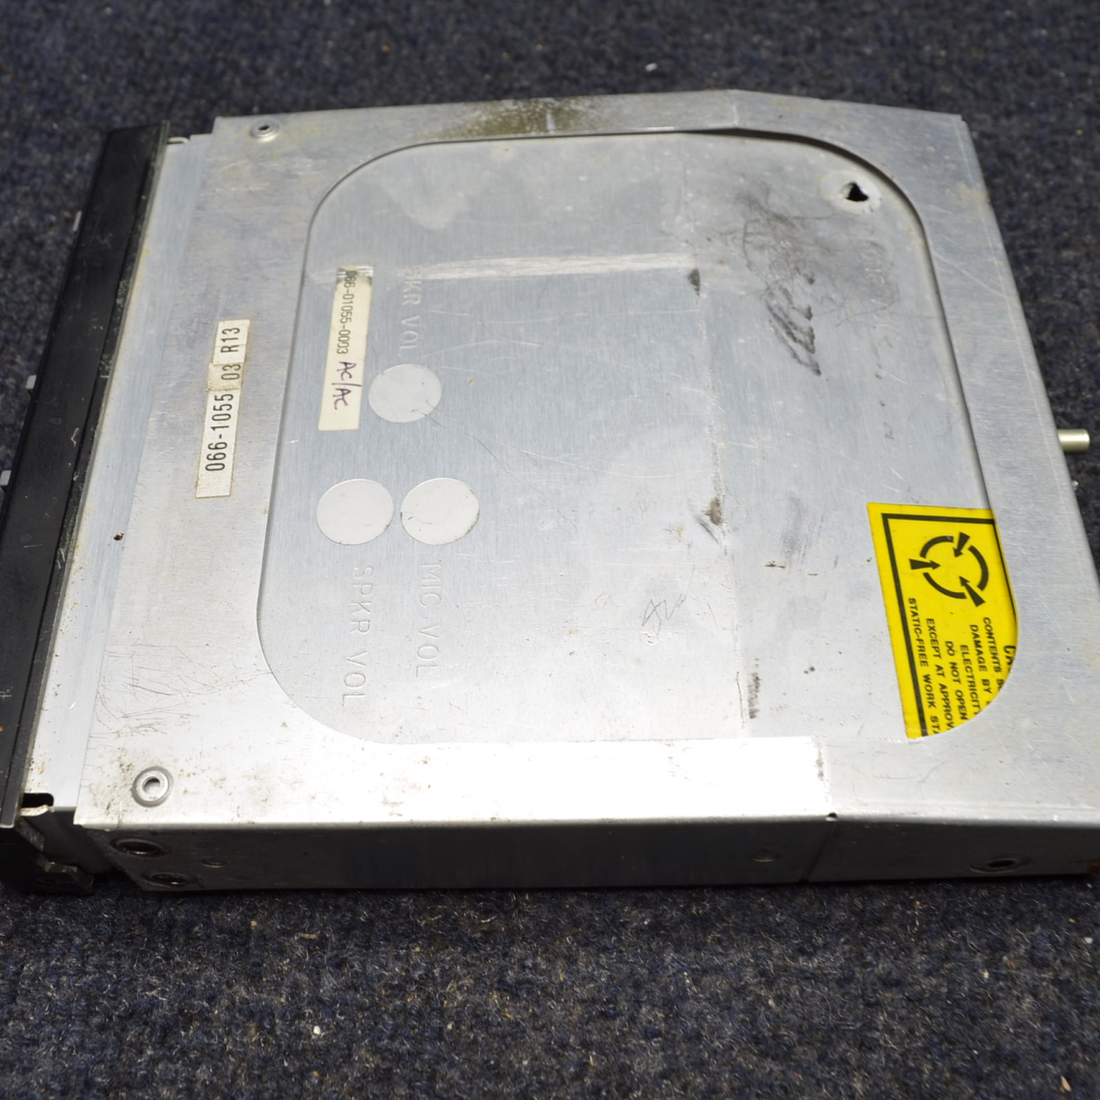 Used aircraft parts for sale, 066-1055-03 Cessna C175 KMA 24 BENDIX KING AUDIO PANEL W/ RACK NO CONNECTOR